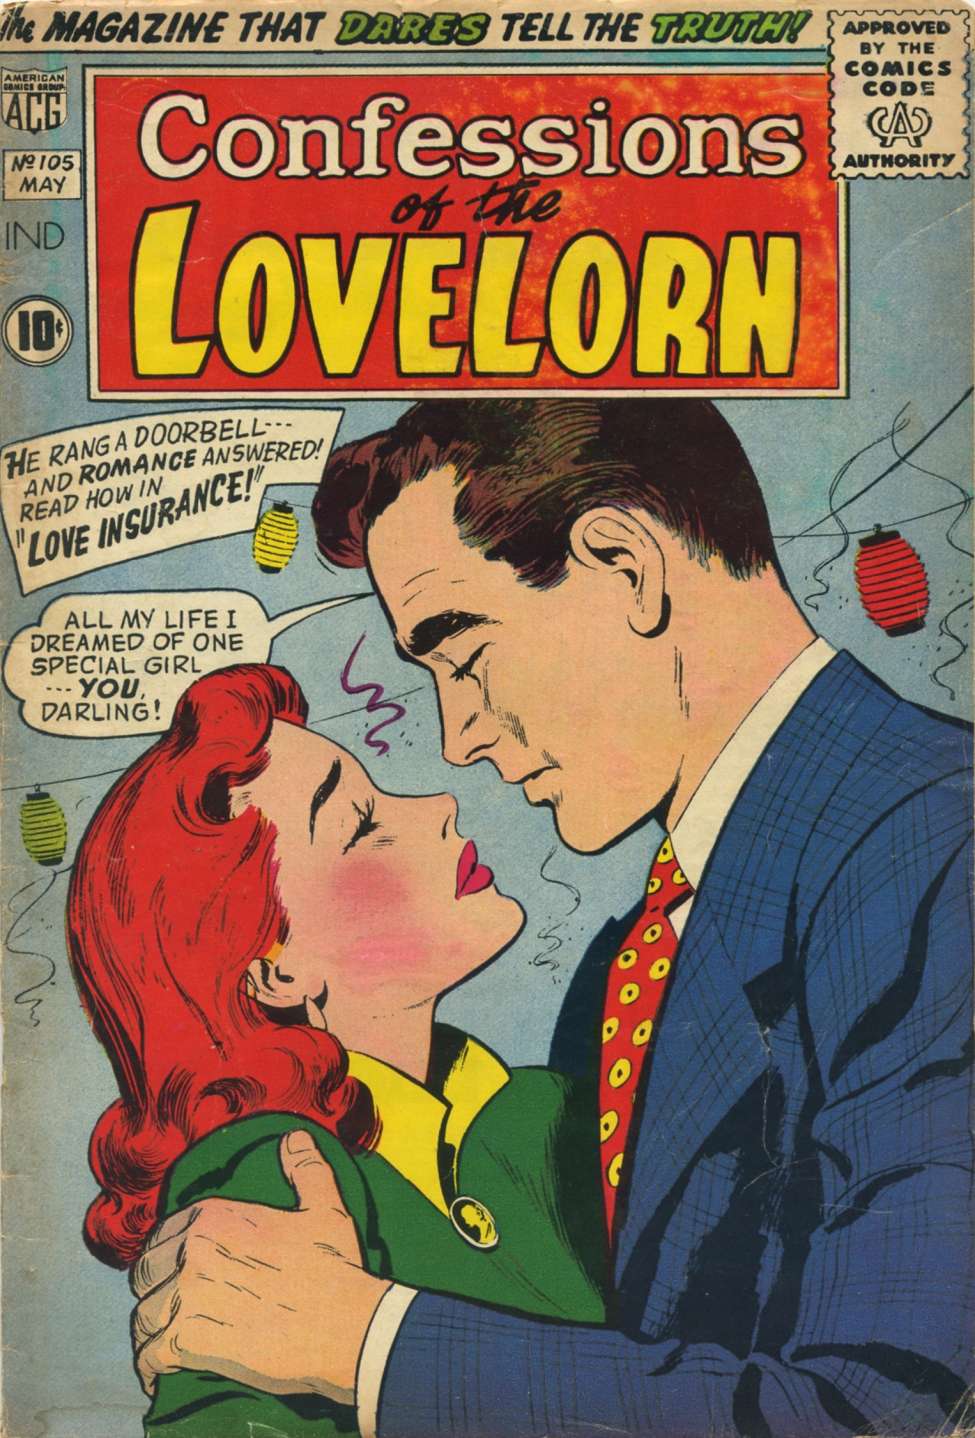 Book Cover For Confessions of the Lovelorn 105